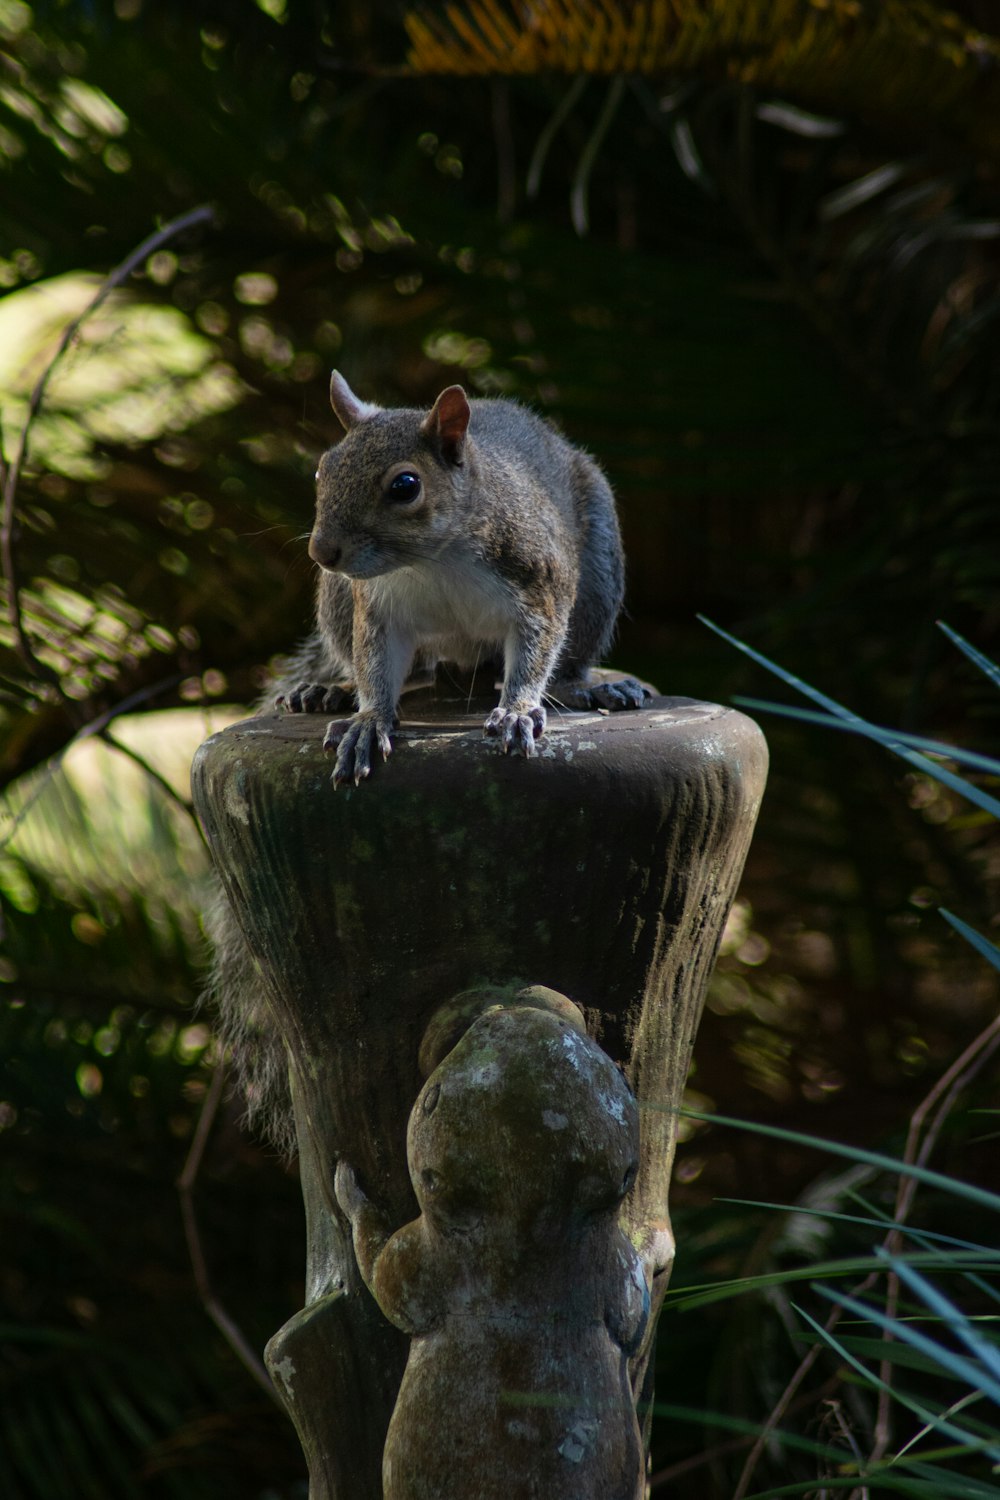 a small squirrel sitting on top of a wooden post